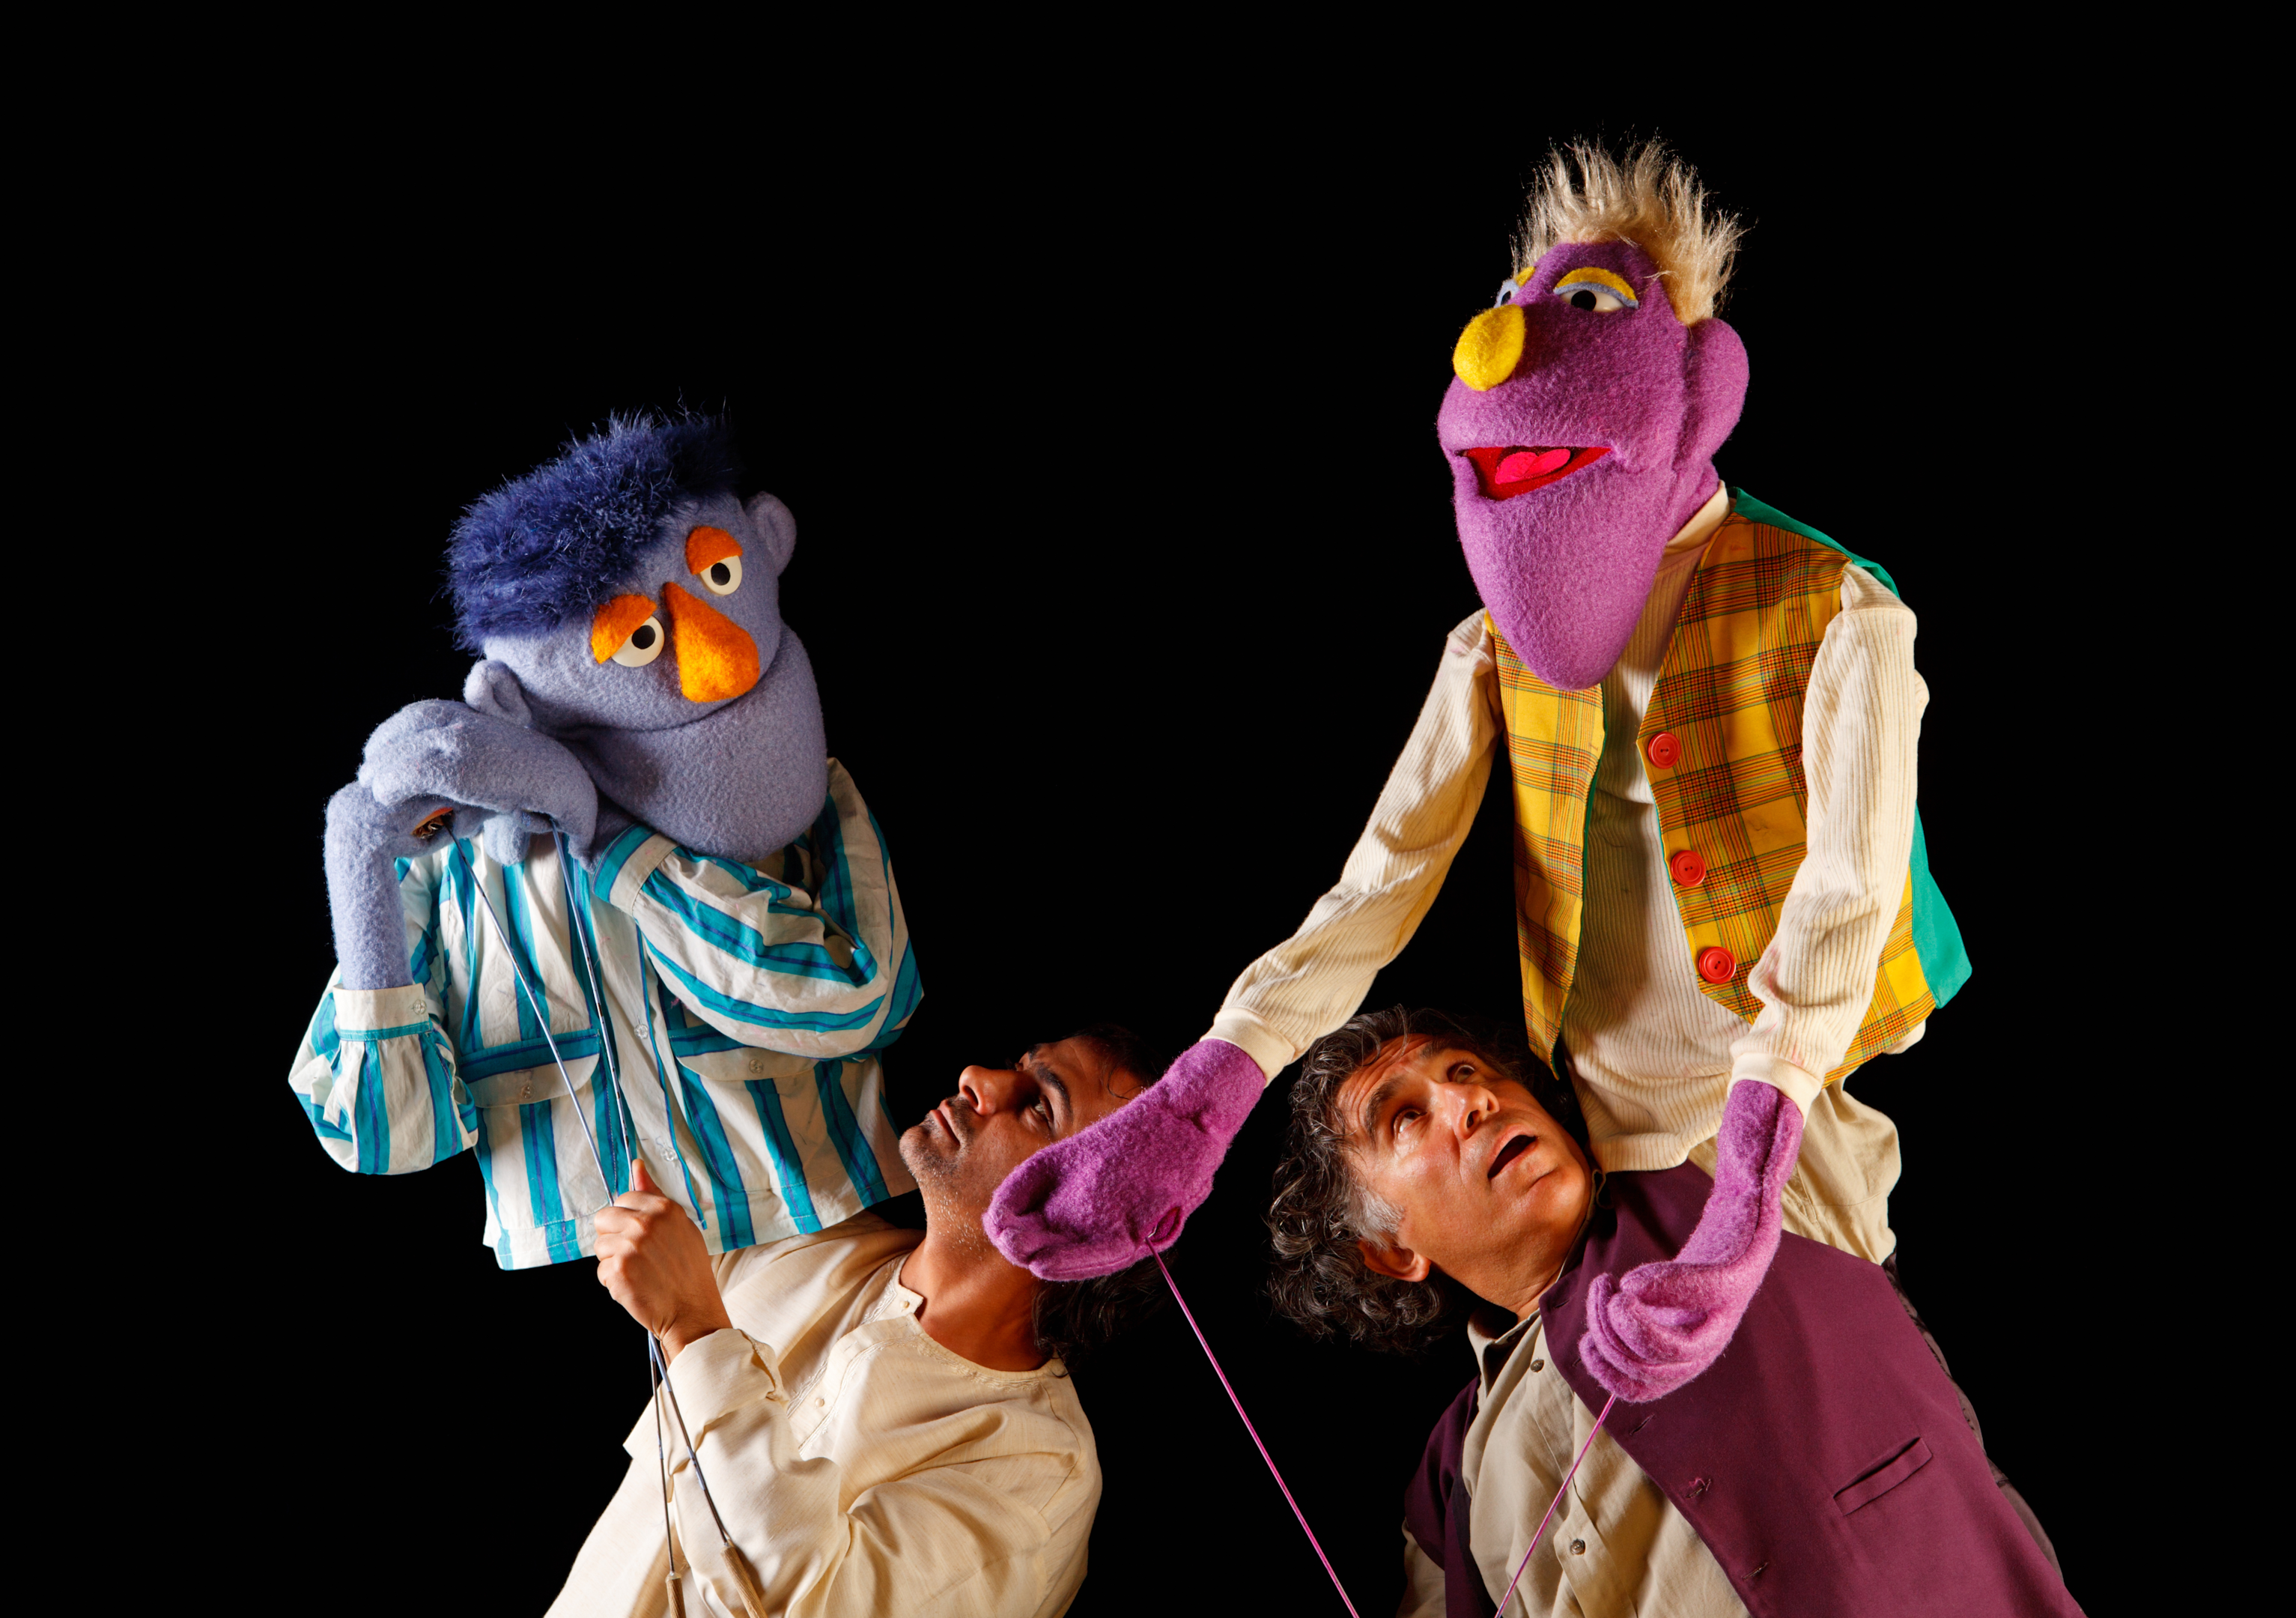 Puppeteers with their puppets connected  show